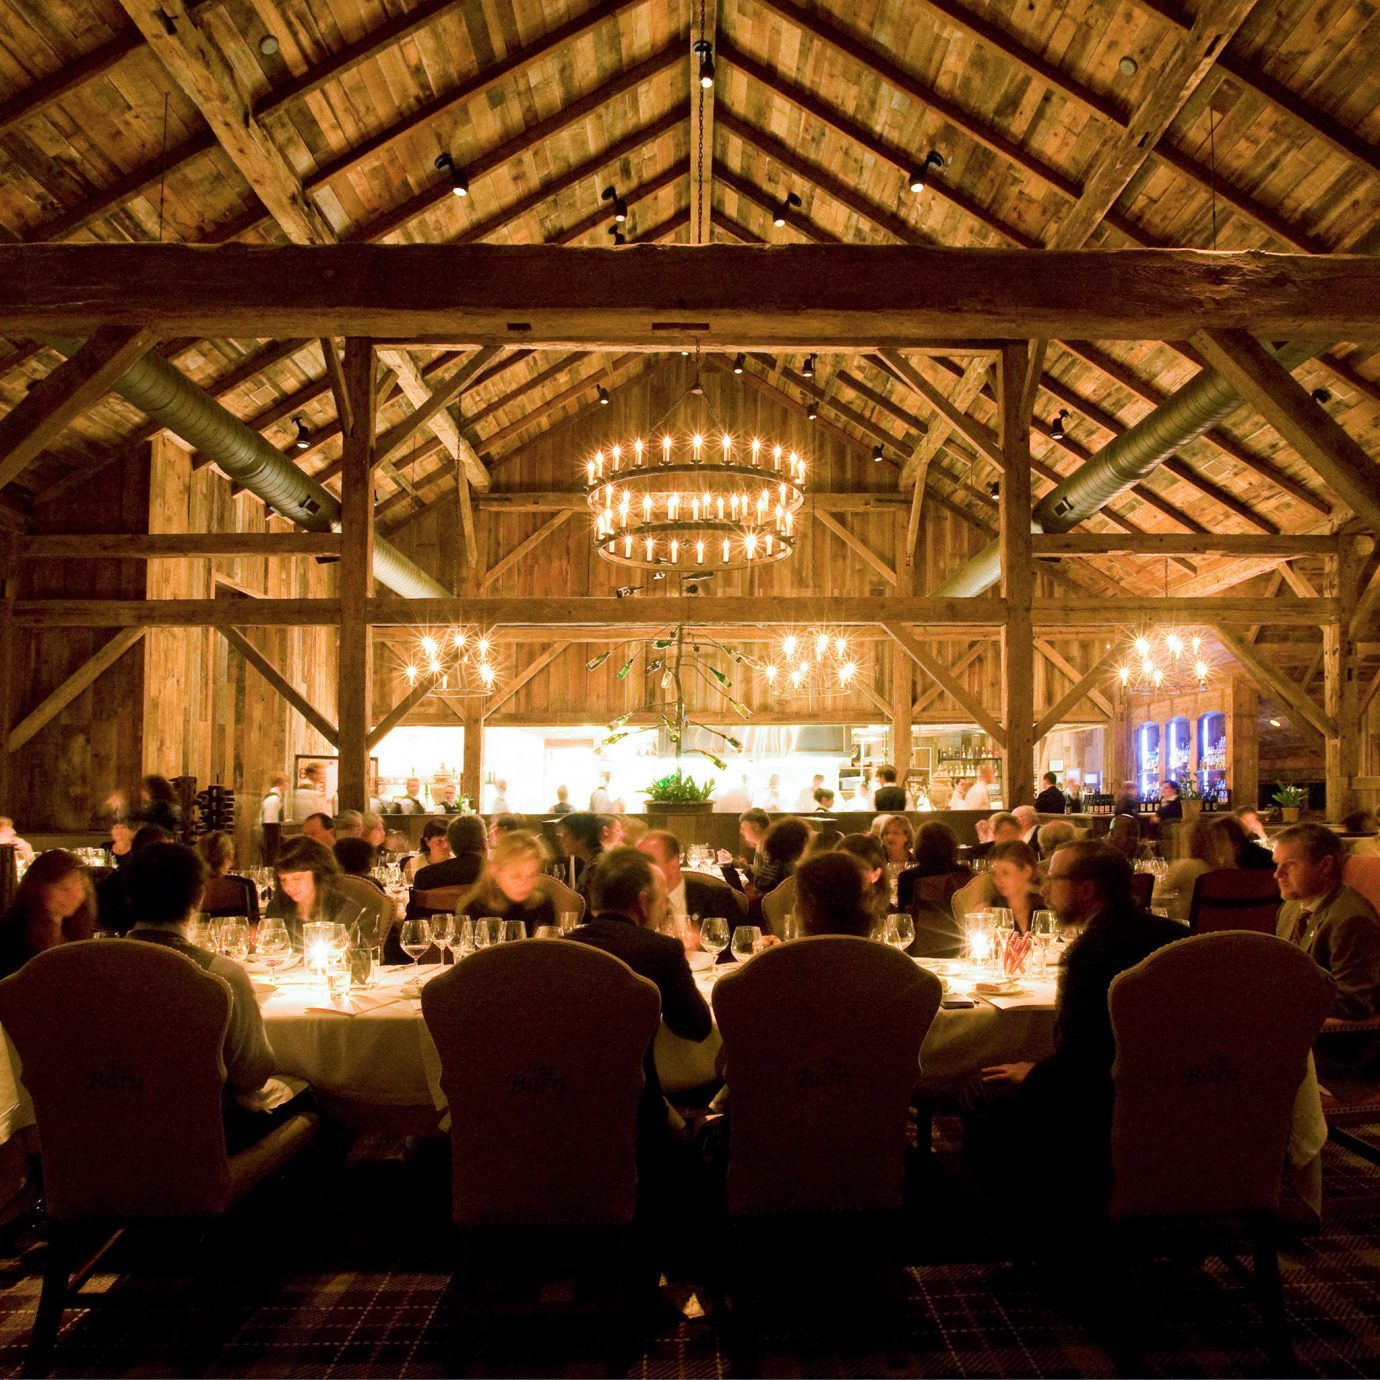 All-Inclusive Resorts Dining Drink Eat Elegant Glamping Hotels Romance Rustic Sport group ceremony